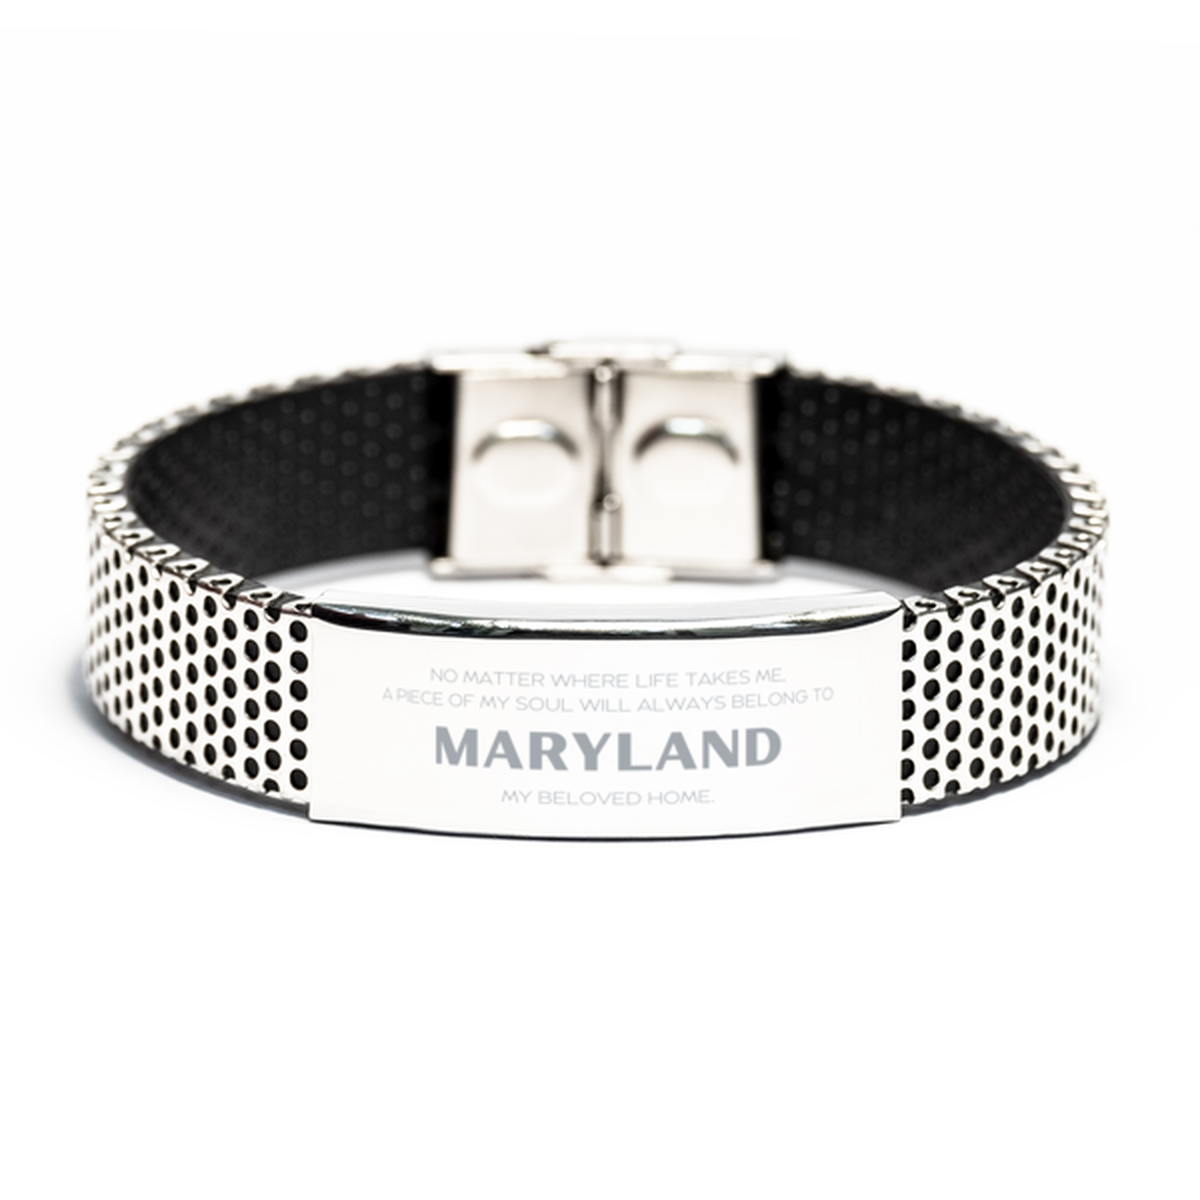 Love Maryland State Gifts, My soul will always belong to Maryland, Proud Stainless Steel Bracelet, Birthday Unique Gifts For Maryland Men, Women, Friends